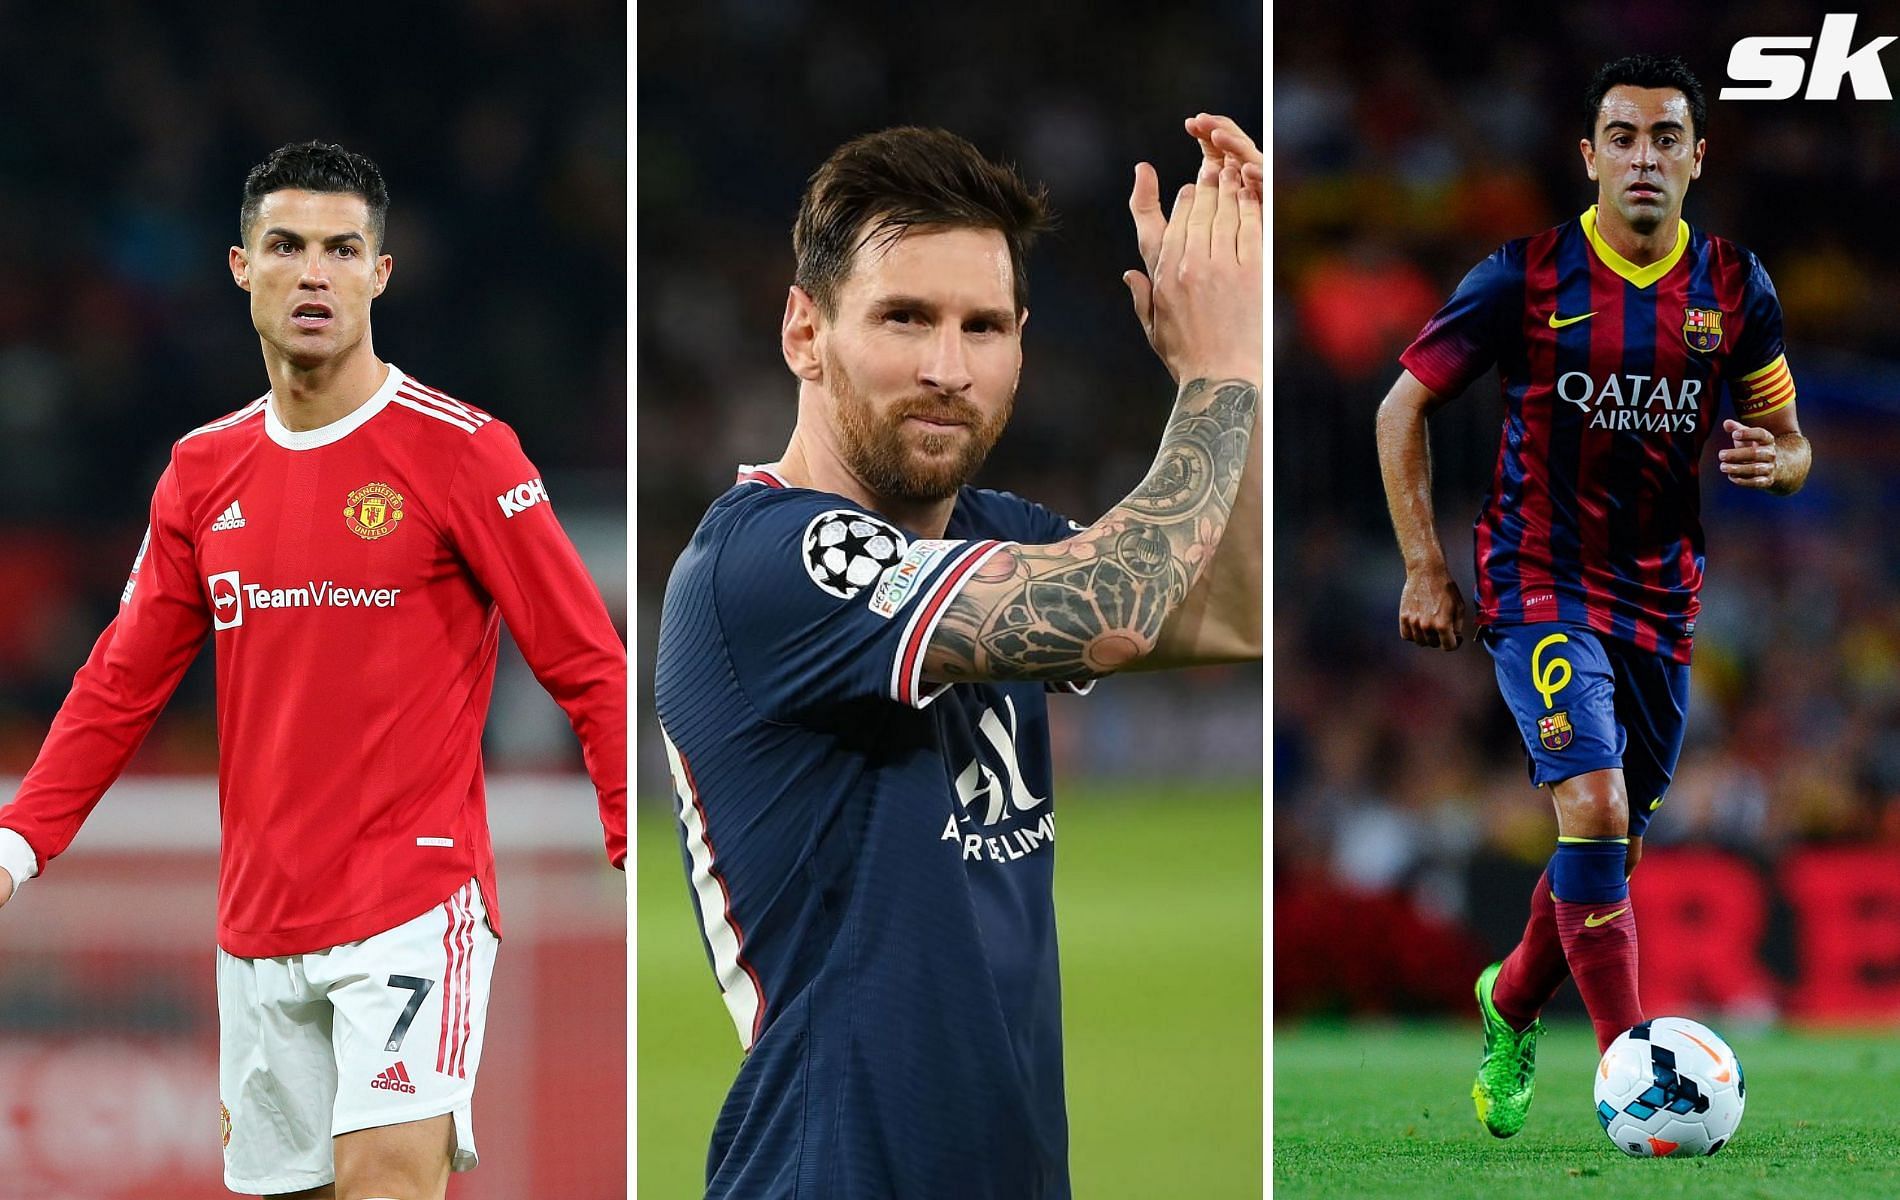 Lionel Messi, Cristiano Ronaldo and Xavi are among the greatest winners since 2000